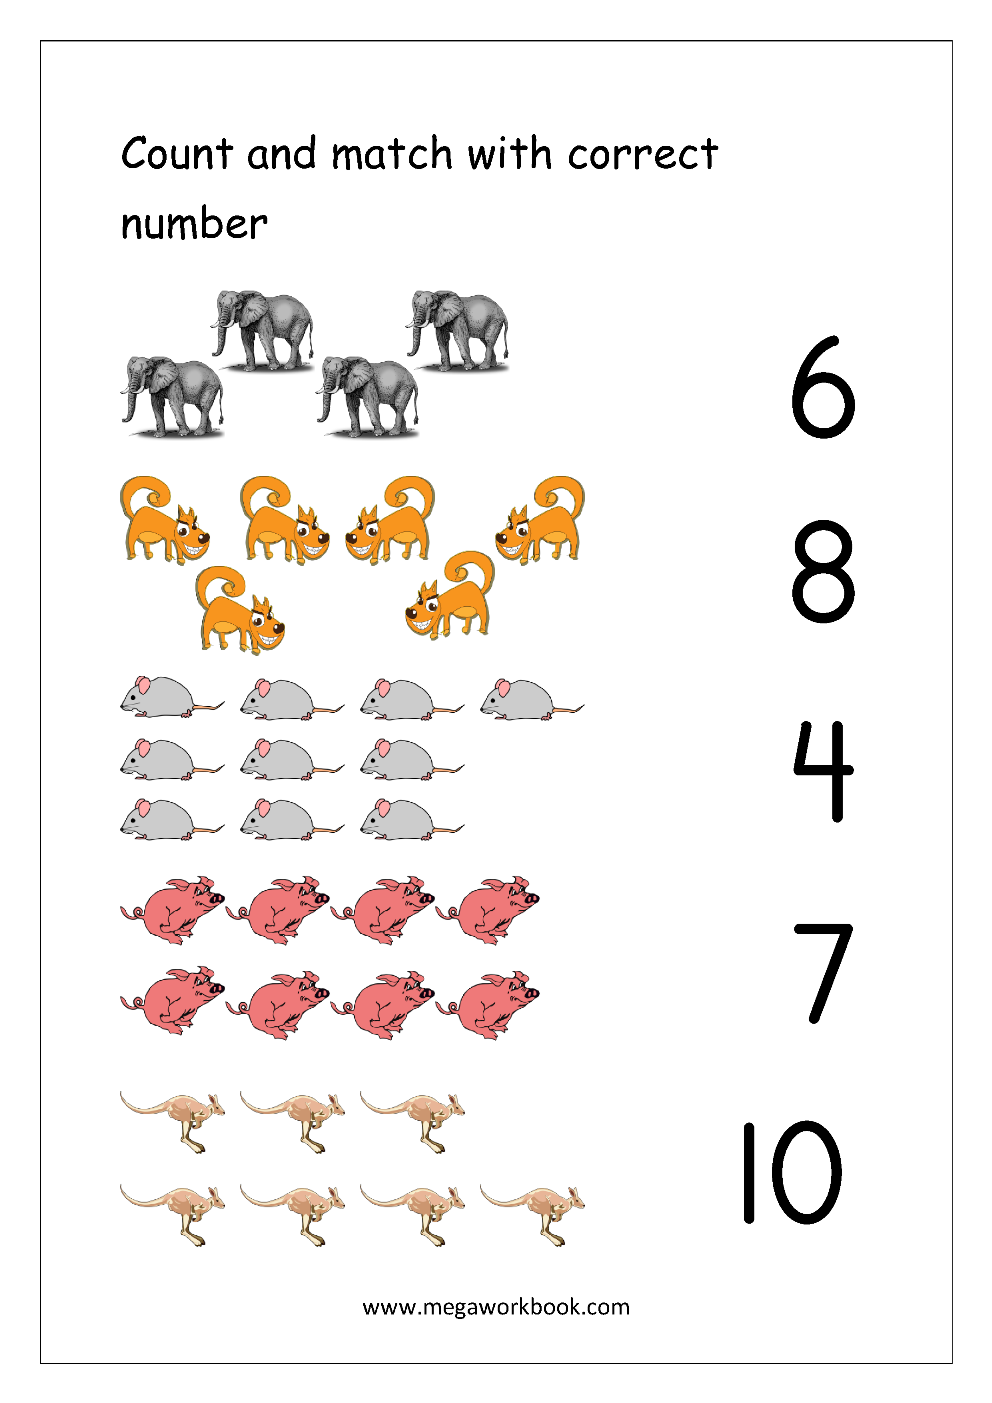 Free Printable Number Matching Worksheets For Kindergarten And Preschool Count And Match 1 10 MegaWorkbook